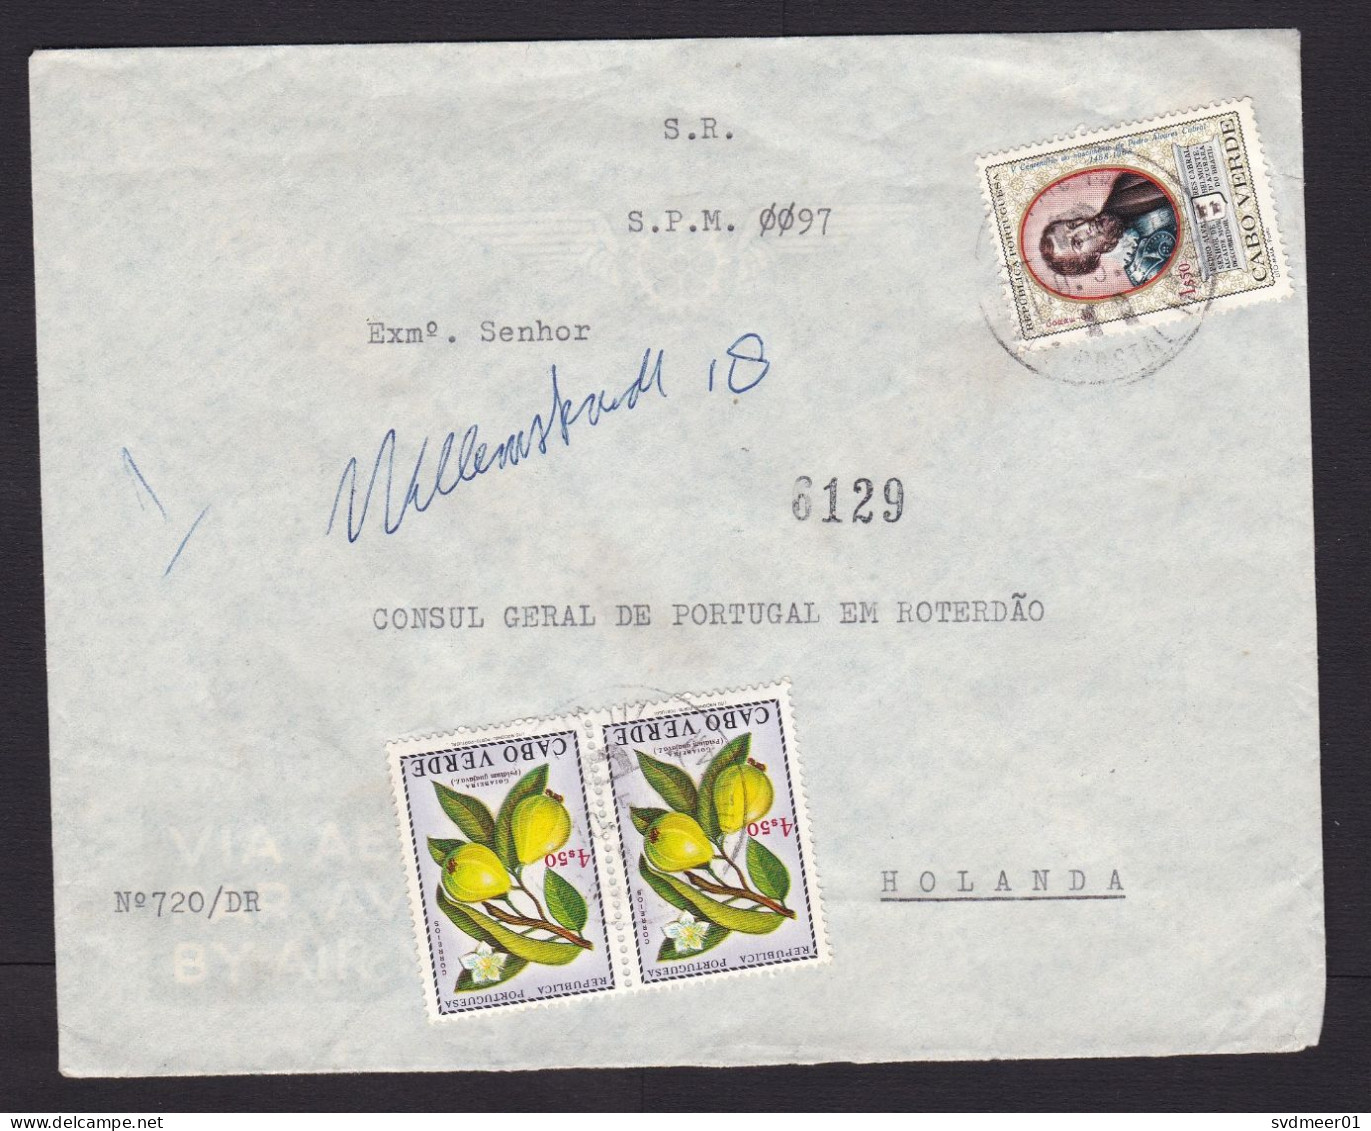 Cabo Verde: Cover To Netherlands, 1973, 3 Stamps, Fruit, History, To Consulate, No Address, Written Note (discolouring) - Cape Verde